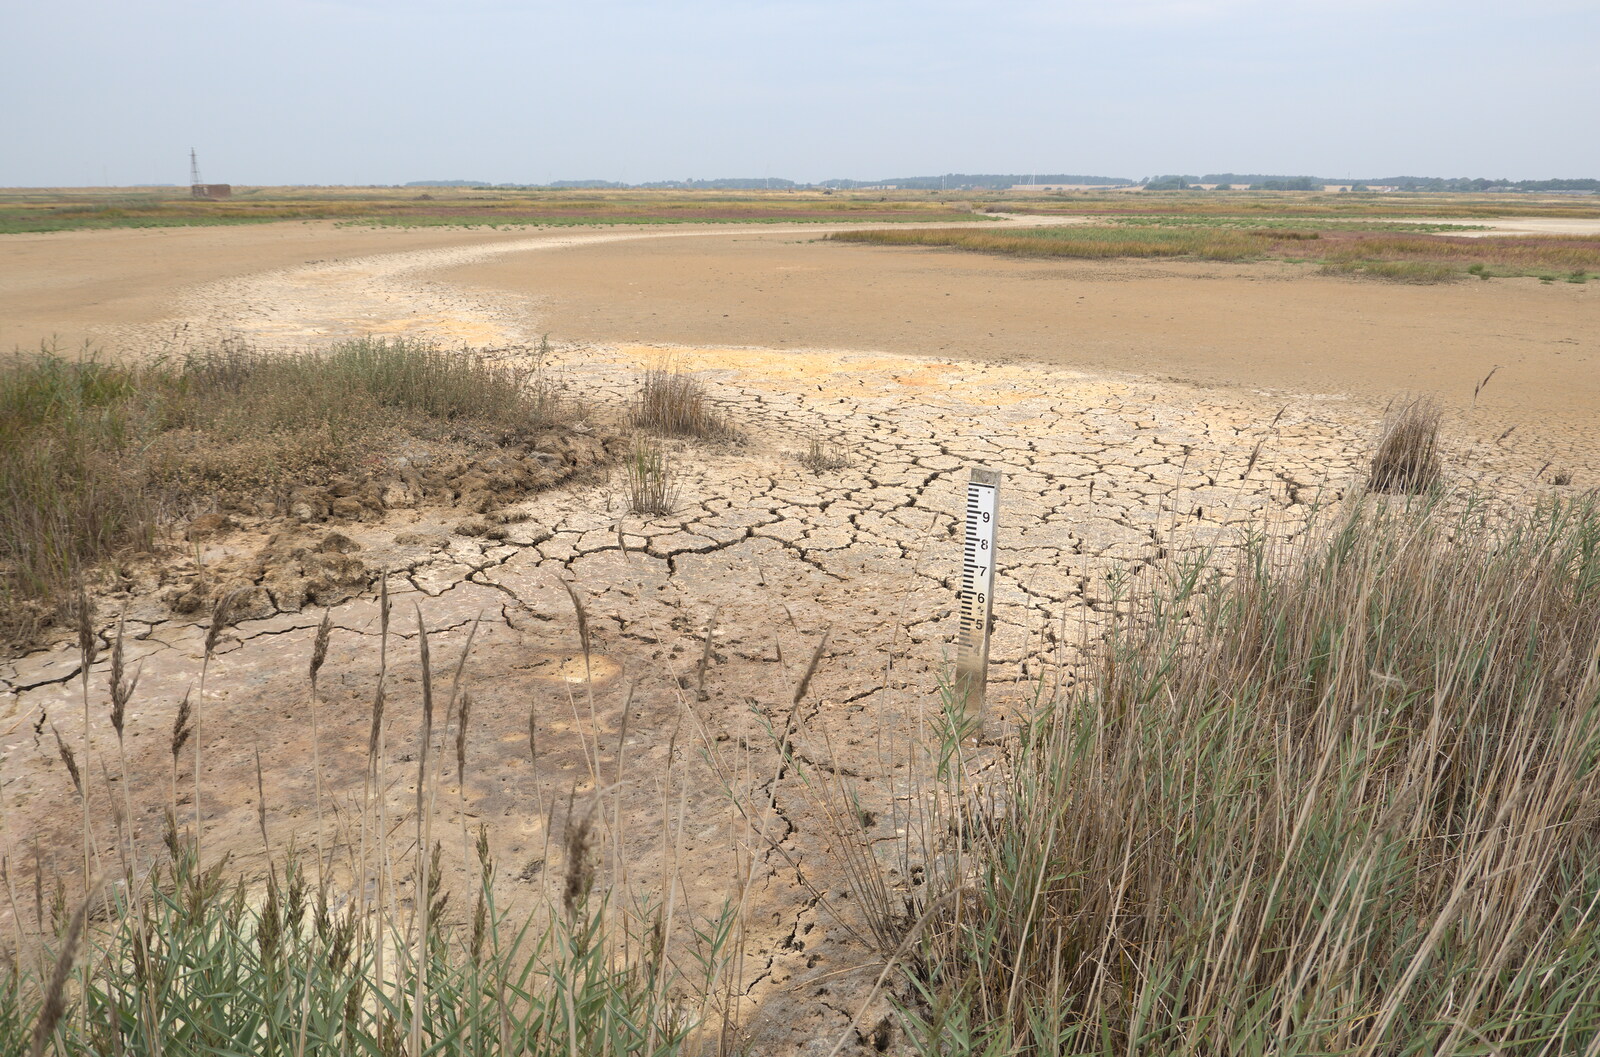 The Ness's shallow lagoons have dried out from A Trip to Orford Ness, Orford, Suffolk - 16th August 2022